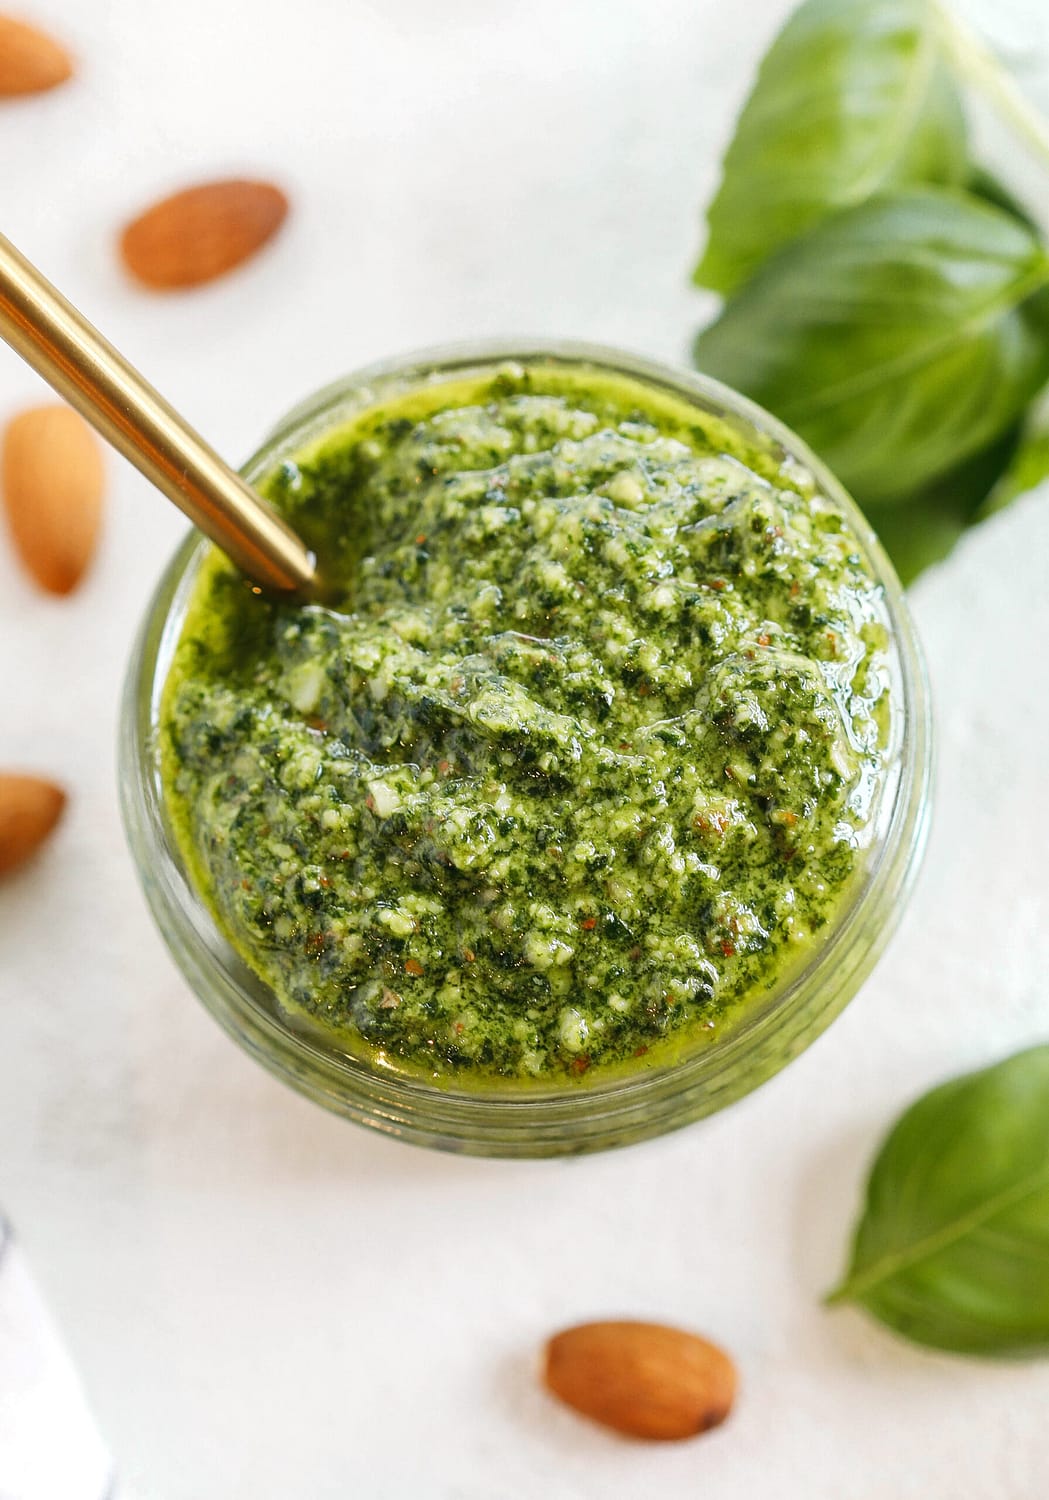 This Simple Basil Almond Pesto recipe combines fresh, delicious ingredients that is easily made in just 10 minutes!  So versatile and perfect with pizza, pasta, chicken, shrimp or veggies!